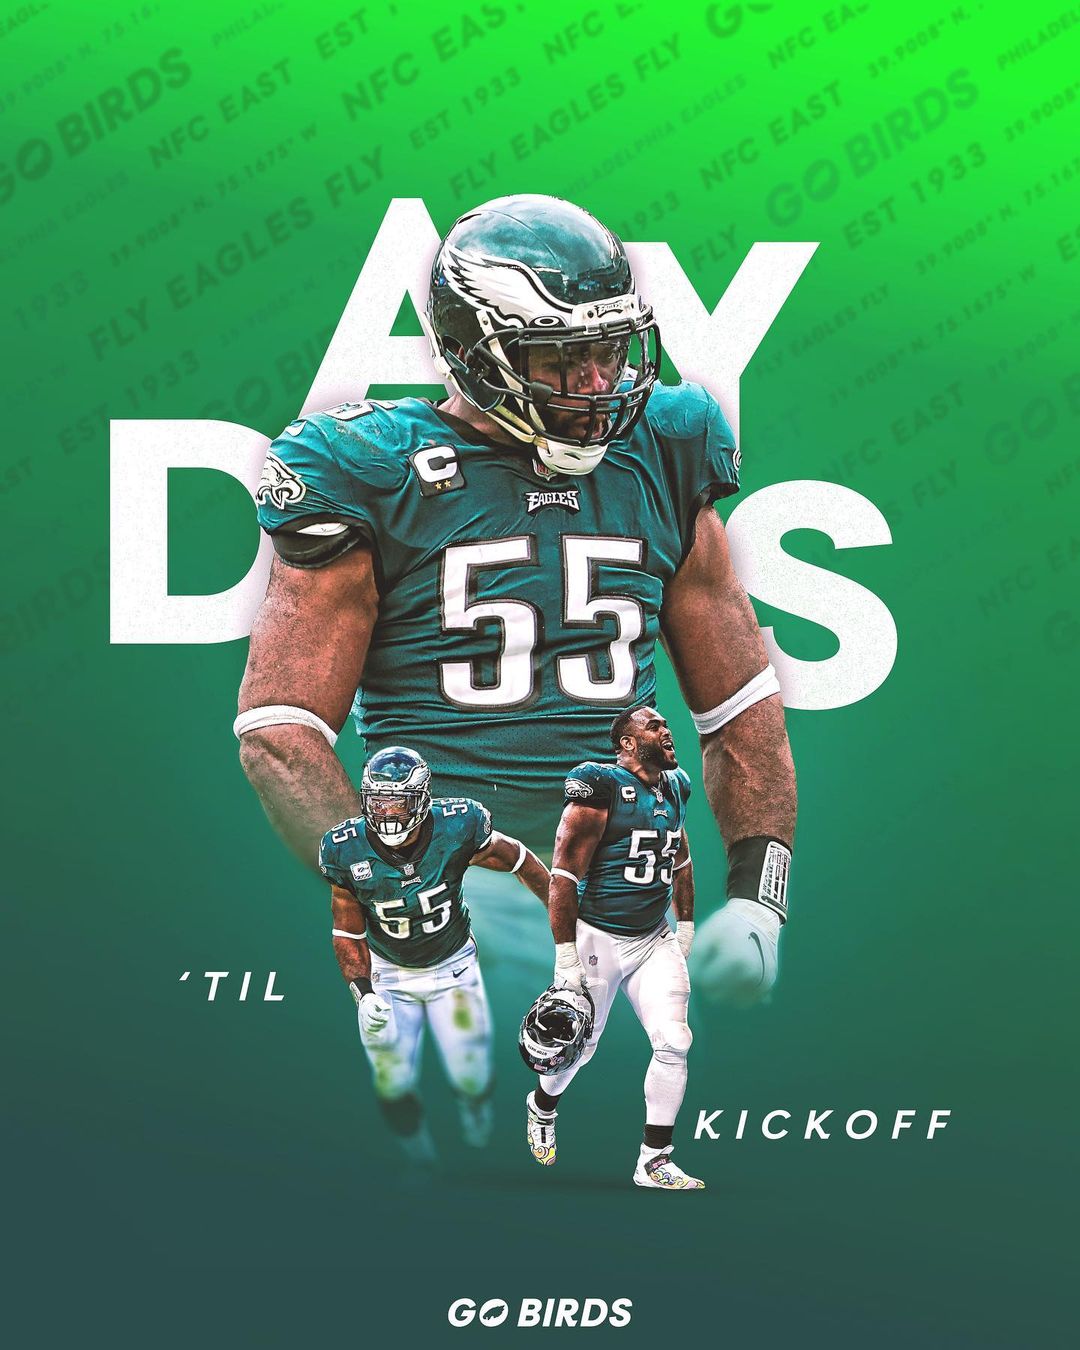 55 is back in 55 days.  @sack_55 | #FlyEaglesFly...